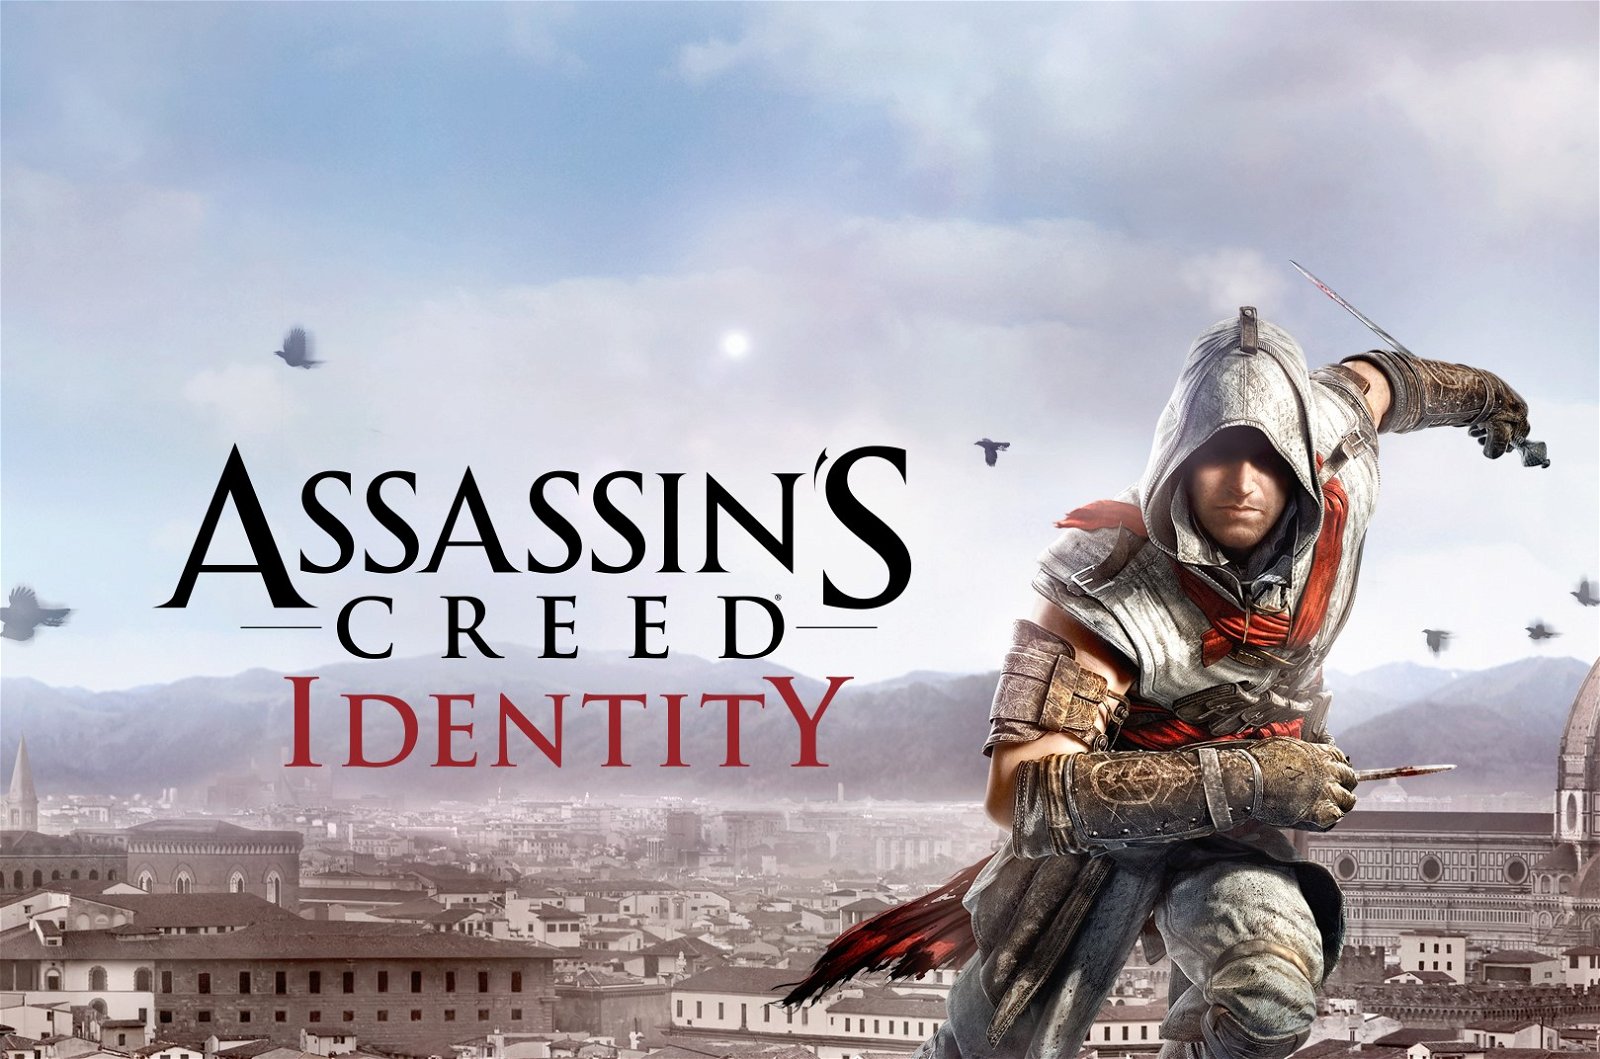 Image of Assassin's Creed Identity